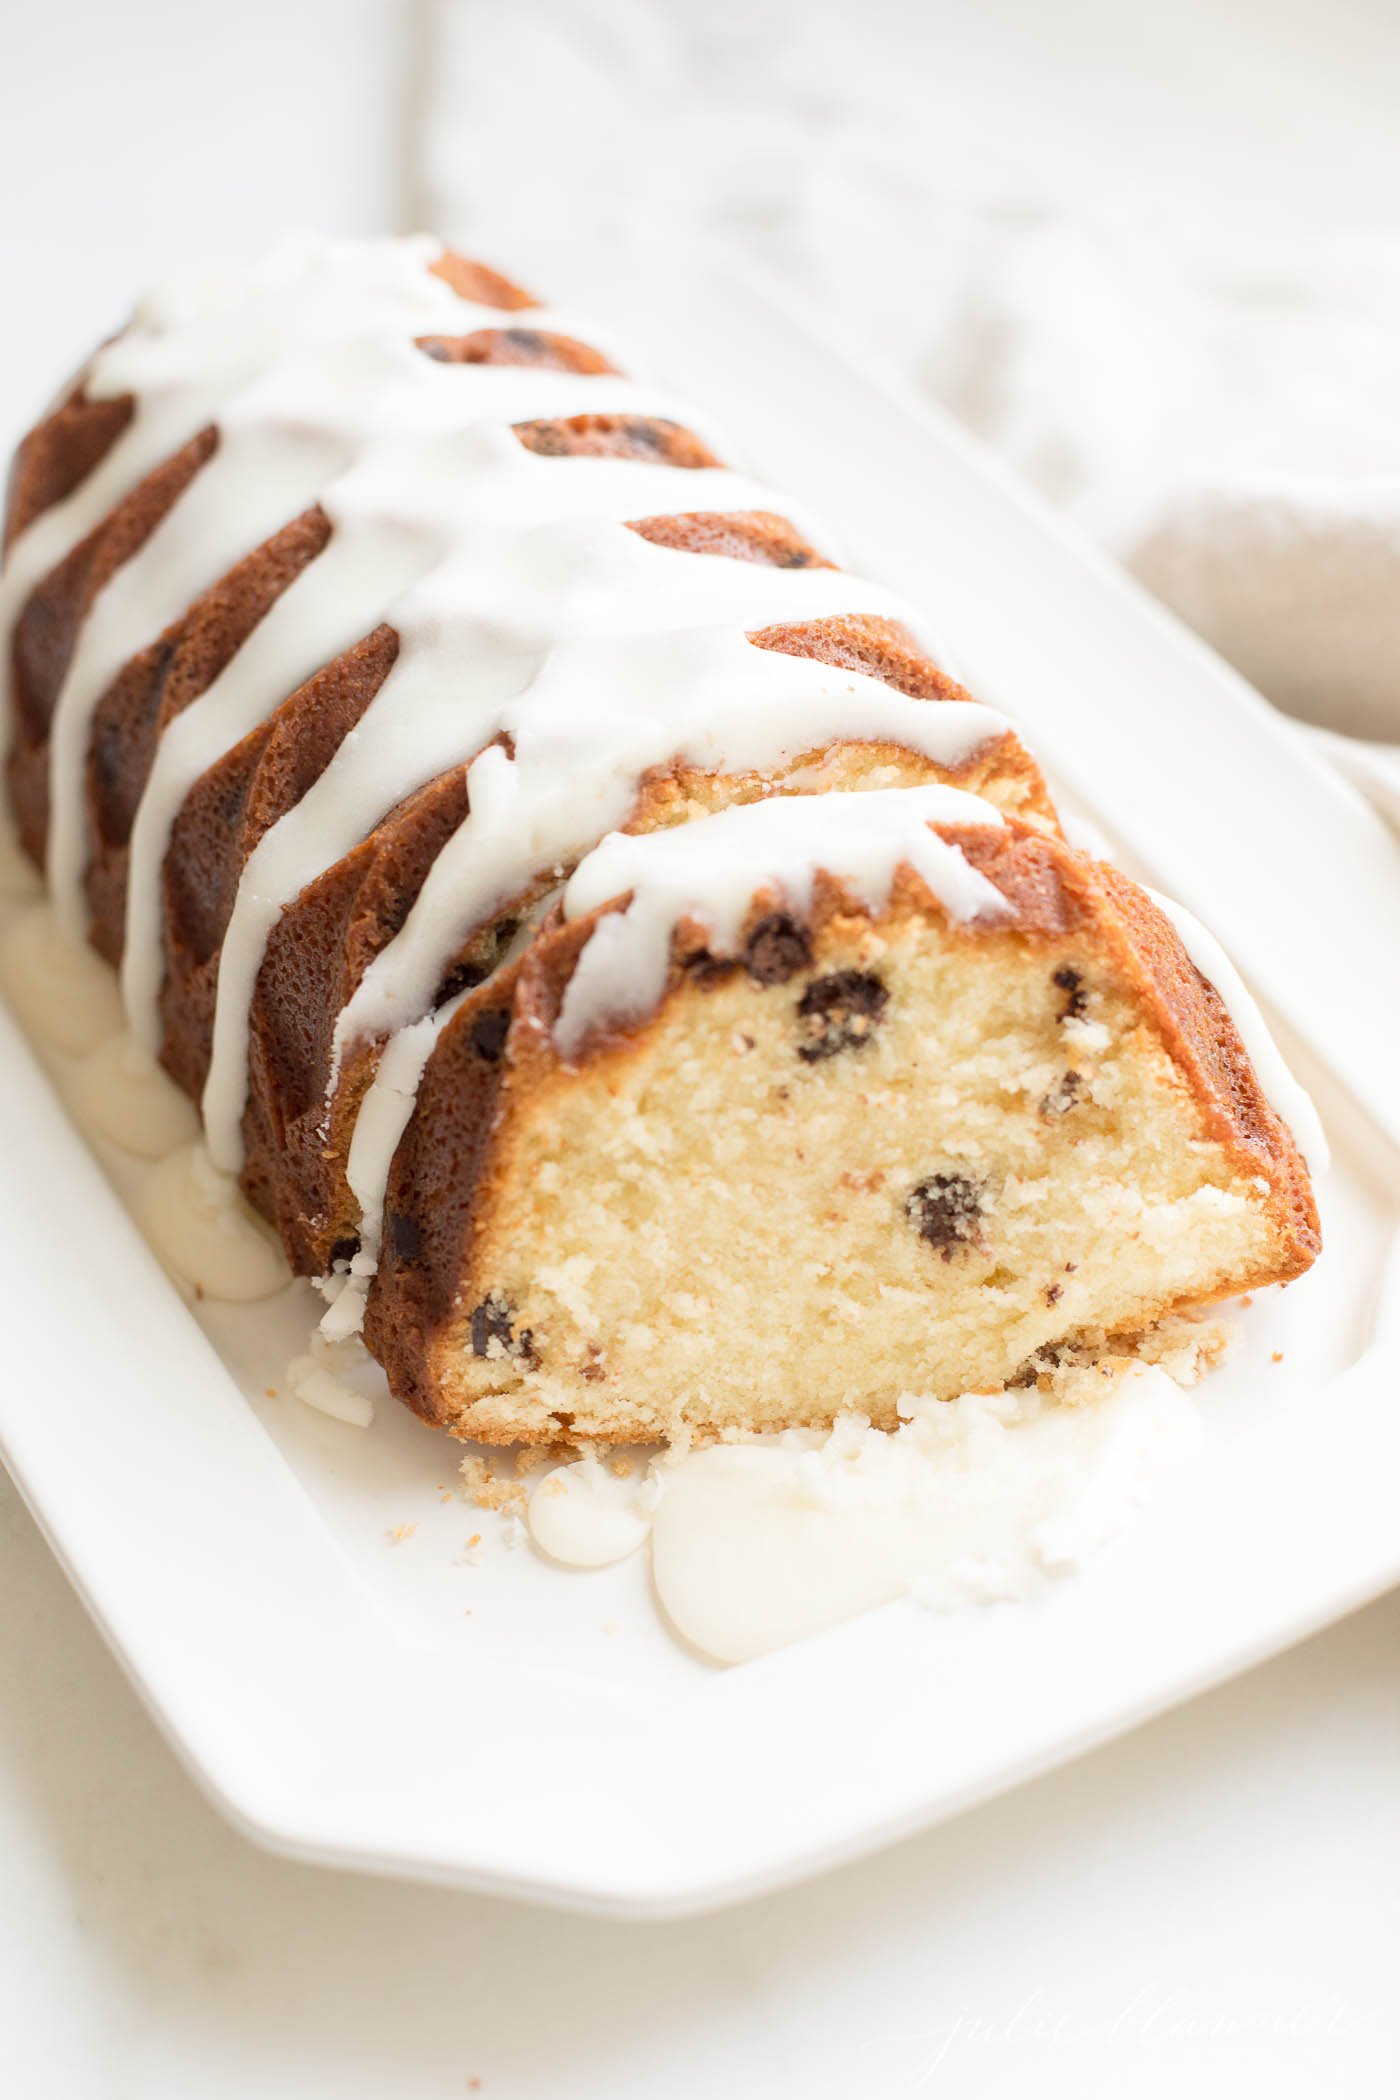 chocolate chip pound cake shaped in a decorative loaf, glazed with icing, resting on a white platter